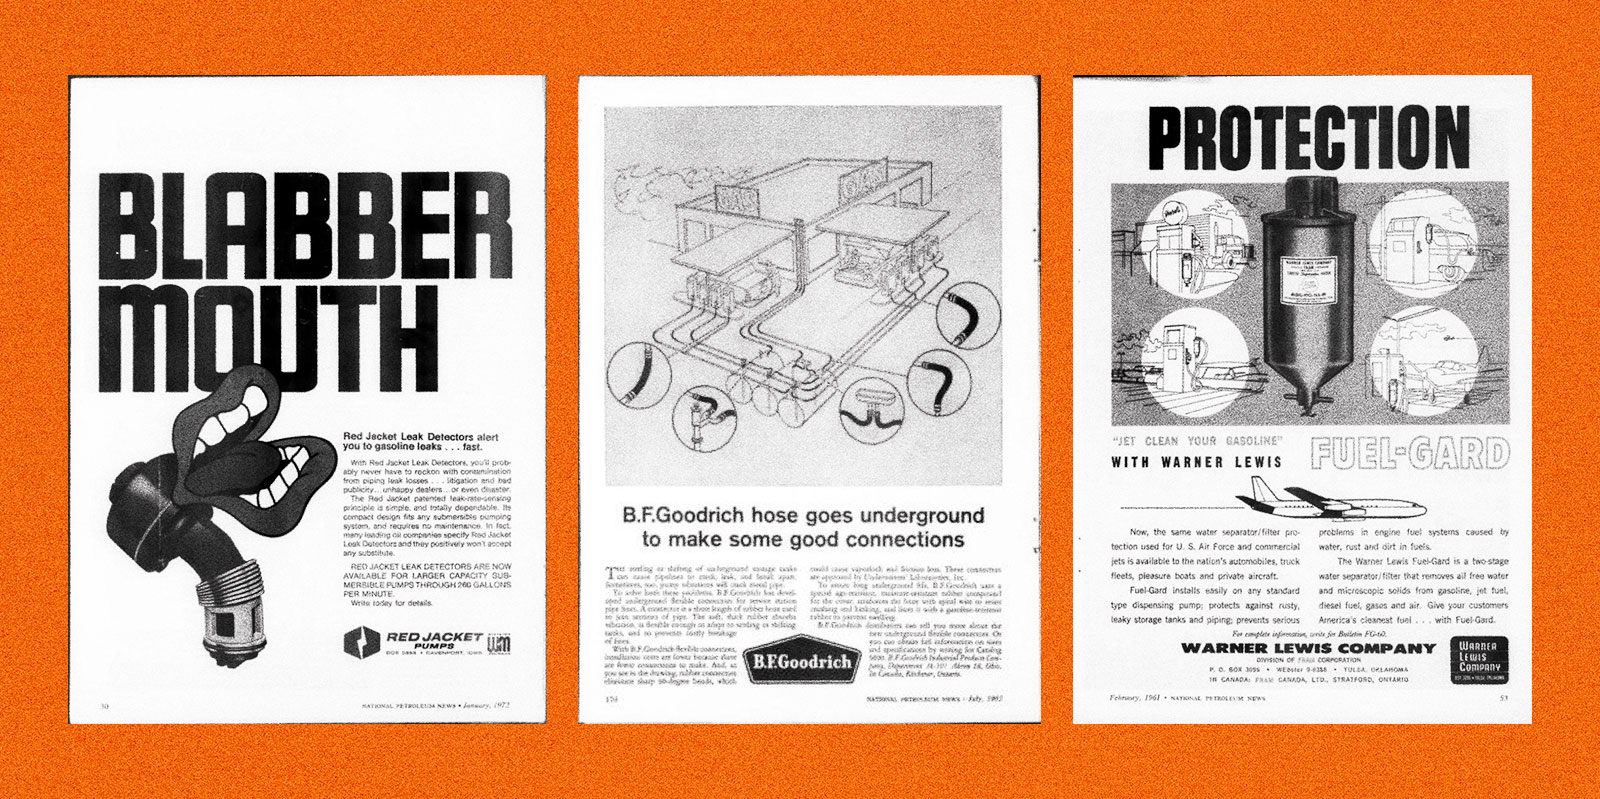 Three ads from the National Petroleum News trade journal